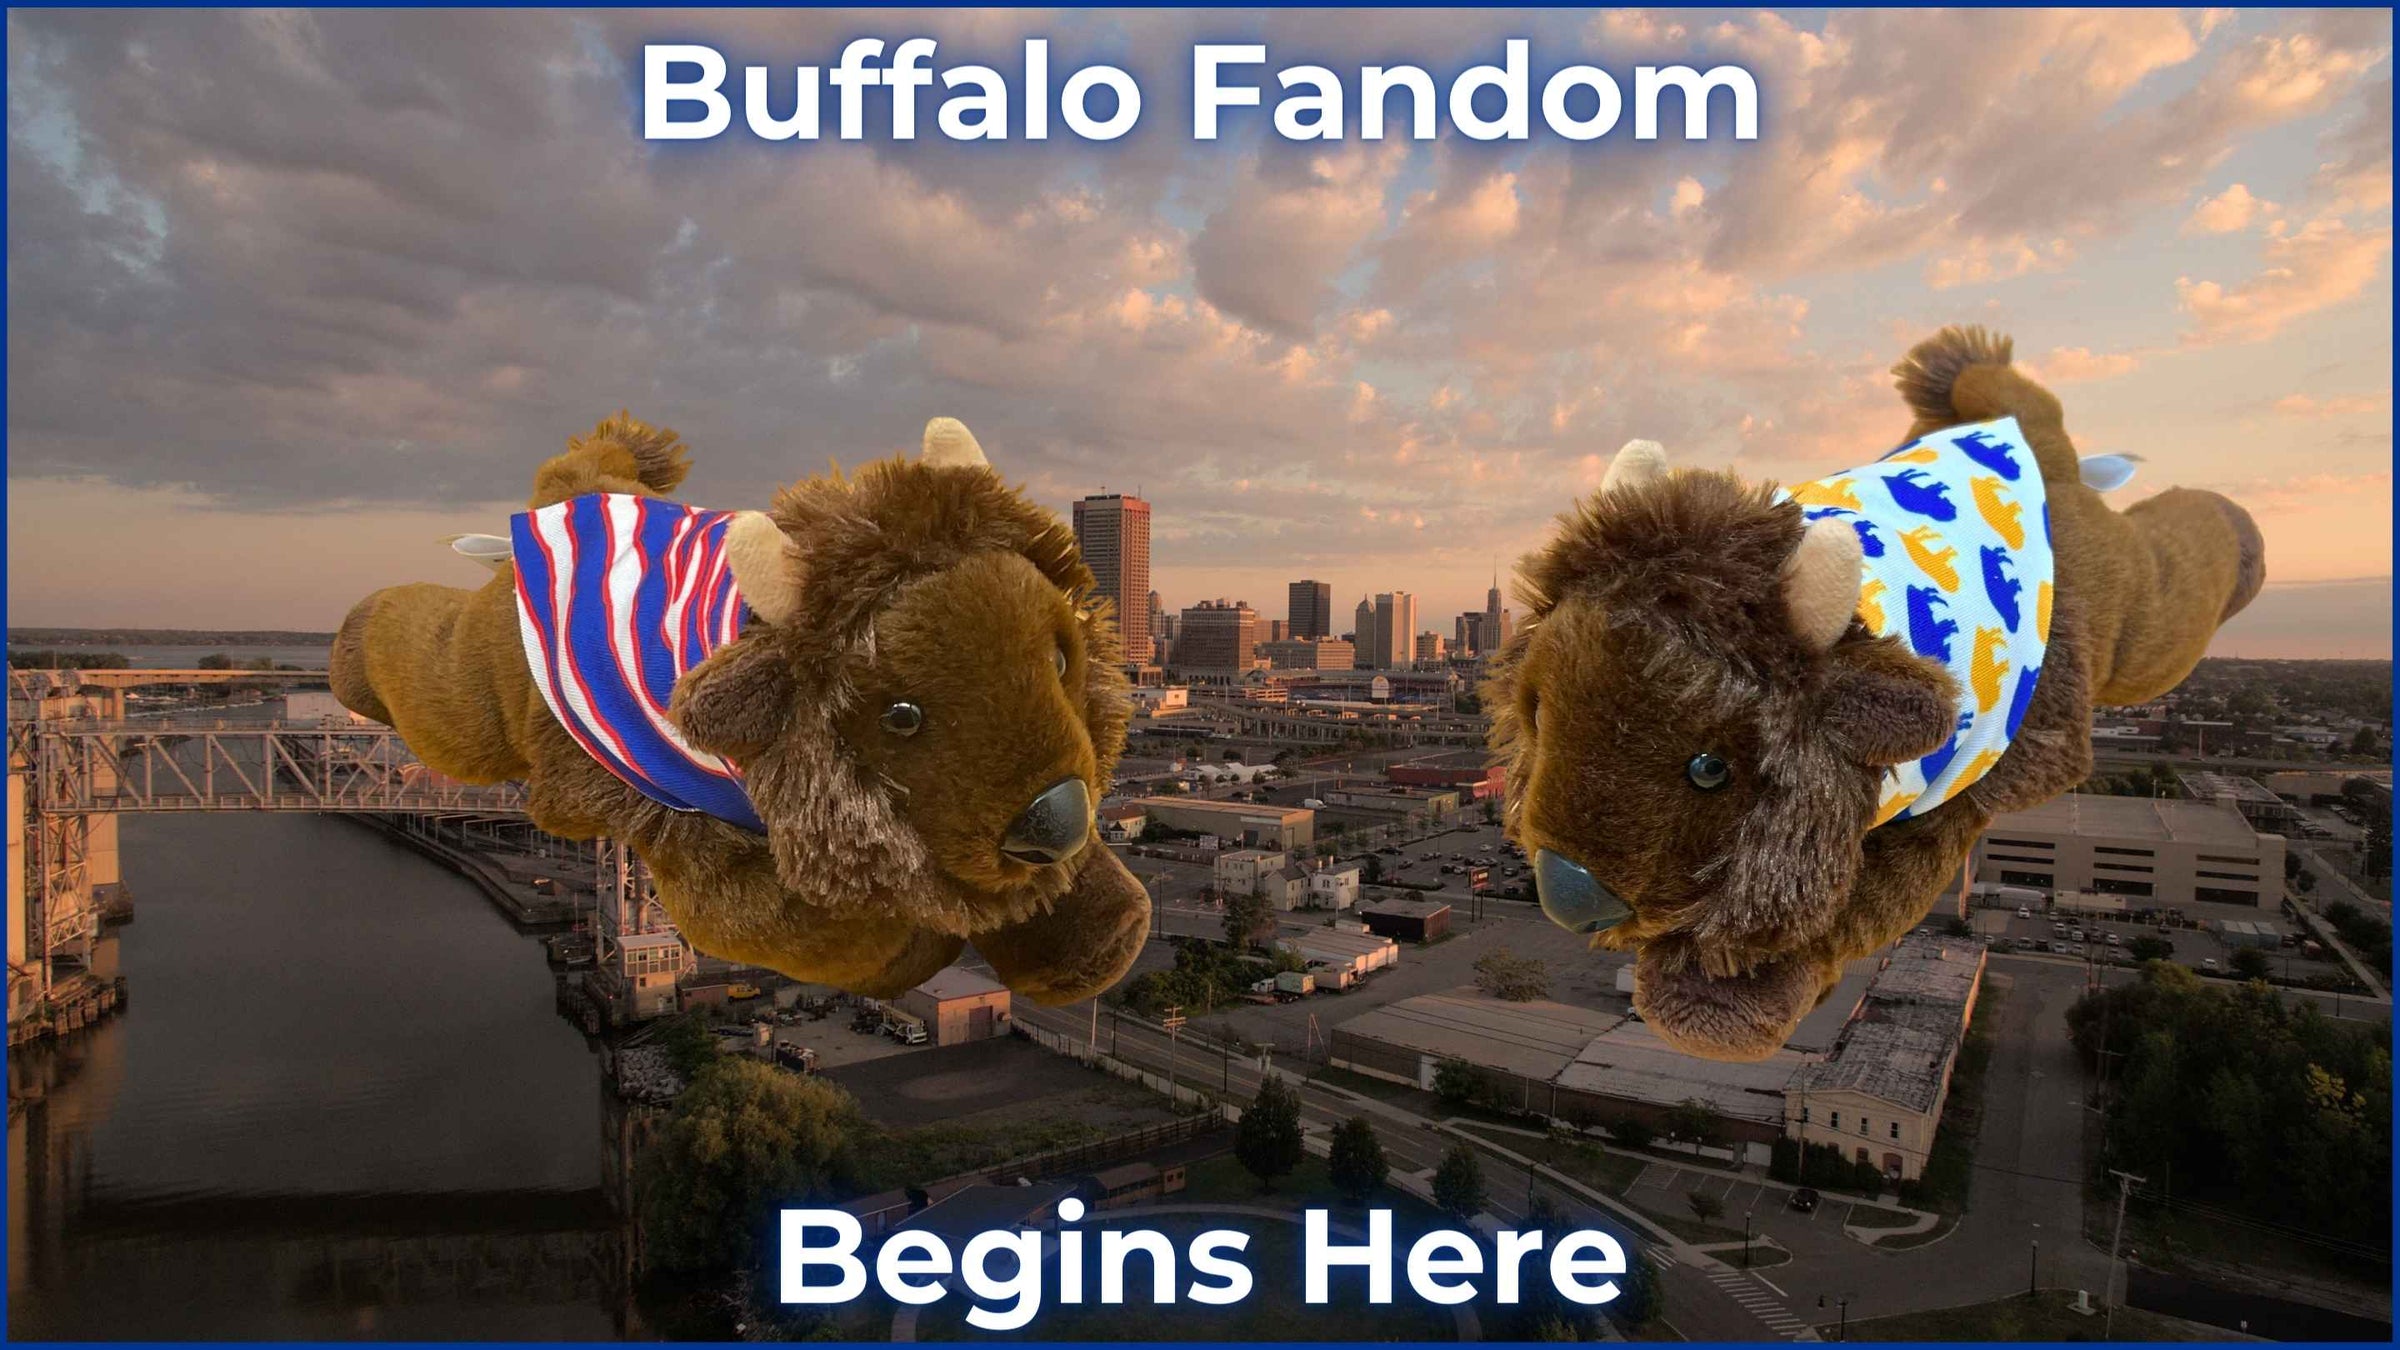 Buffalo Bills unique gifts for young fans: Mafi & Fia plush bison toys showcased against a heart-filled background with the team's logo, captioned 'Your Little Fan's First Cheer' and 'Mafi & Fia: Every Game's Best Friends.